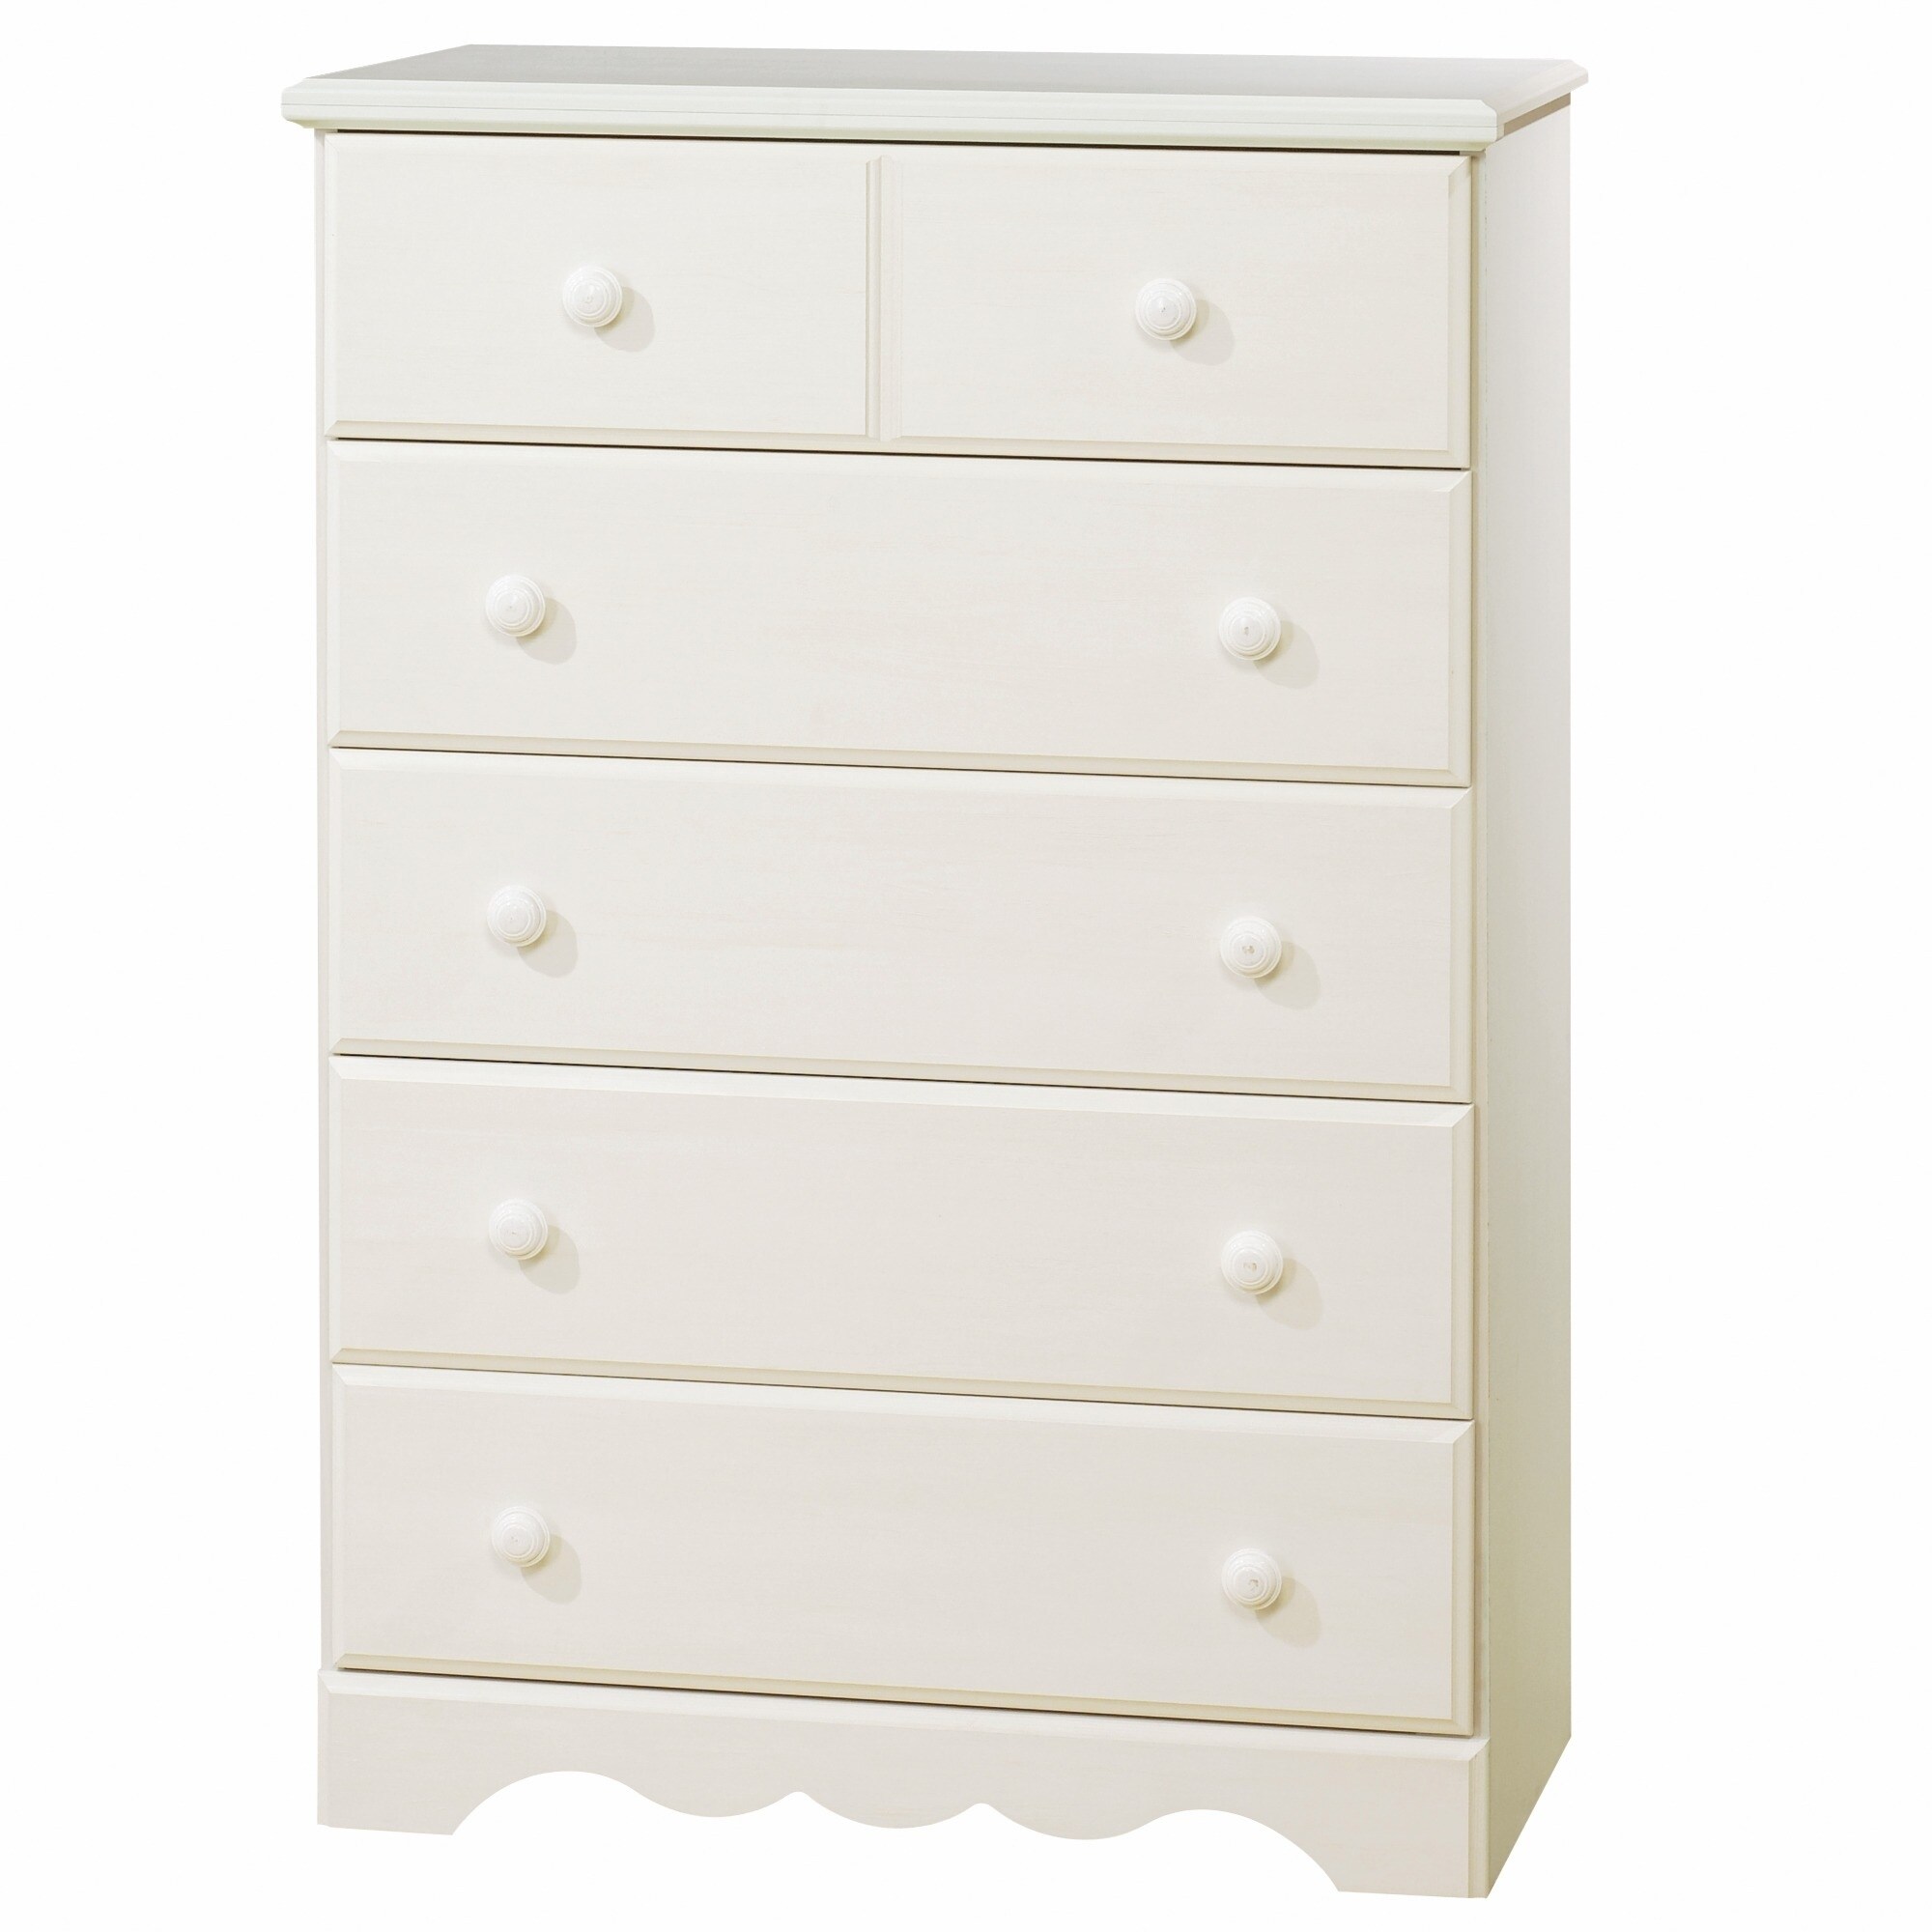 Shop South Shore Summer Breeze 5 Drawer Chest Overstock 20112980